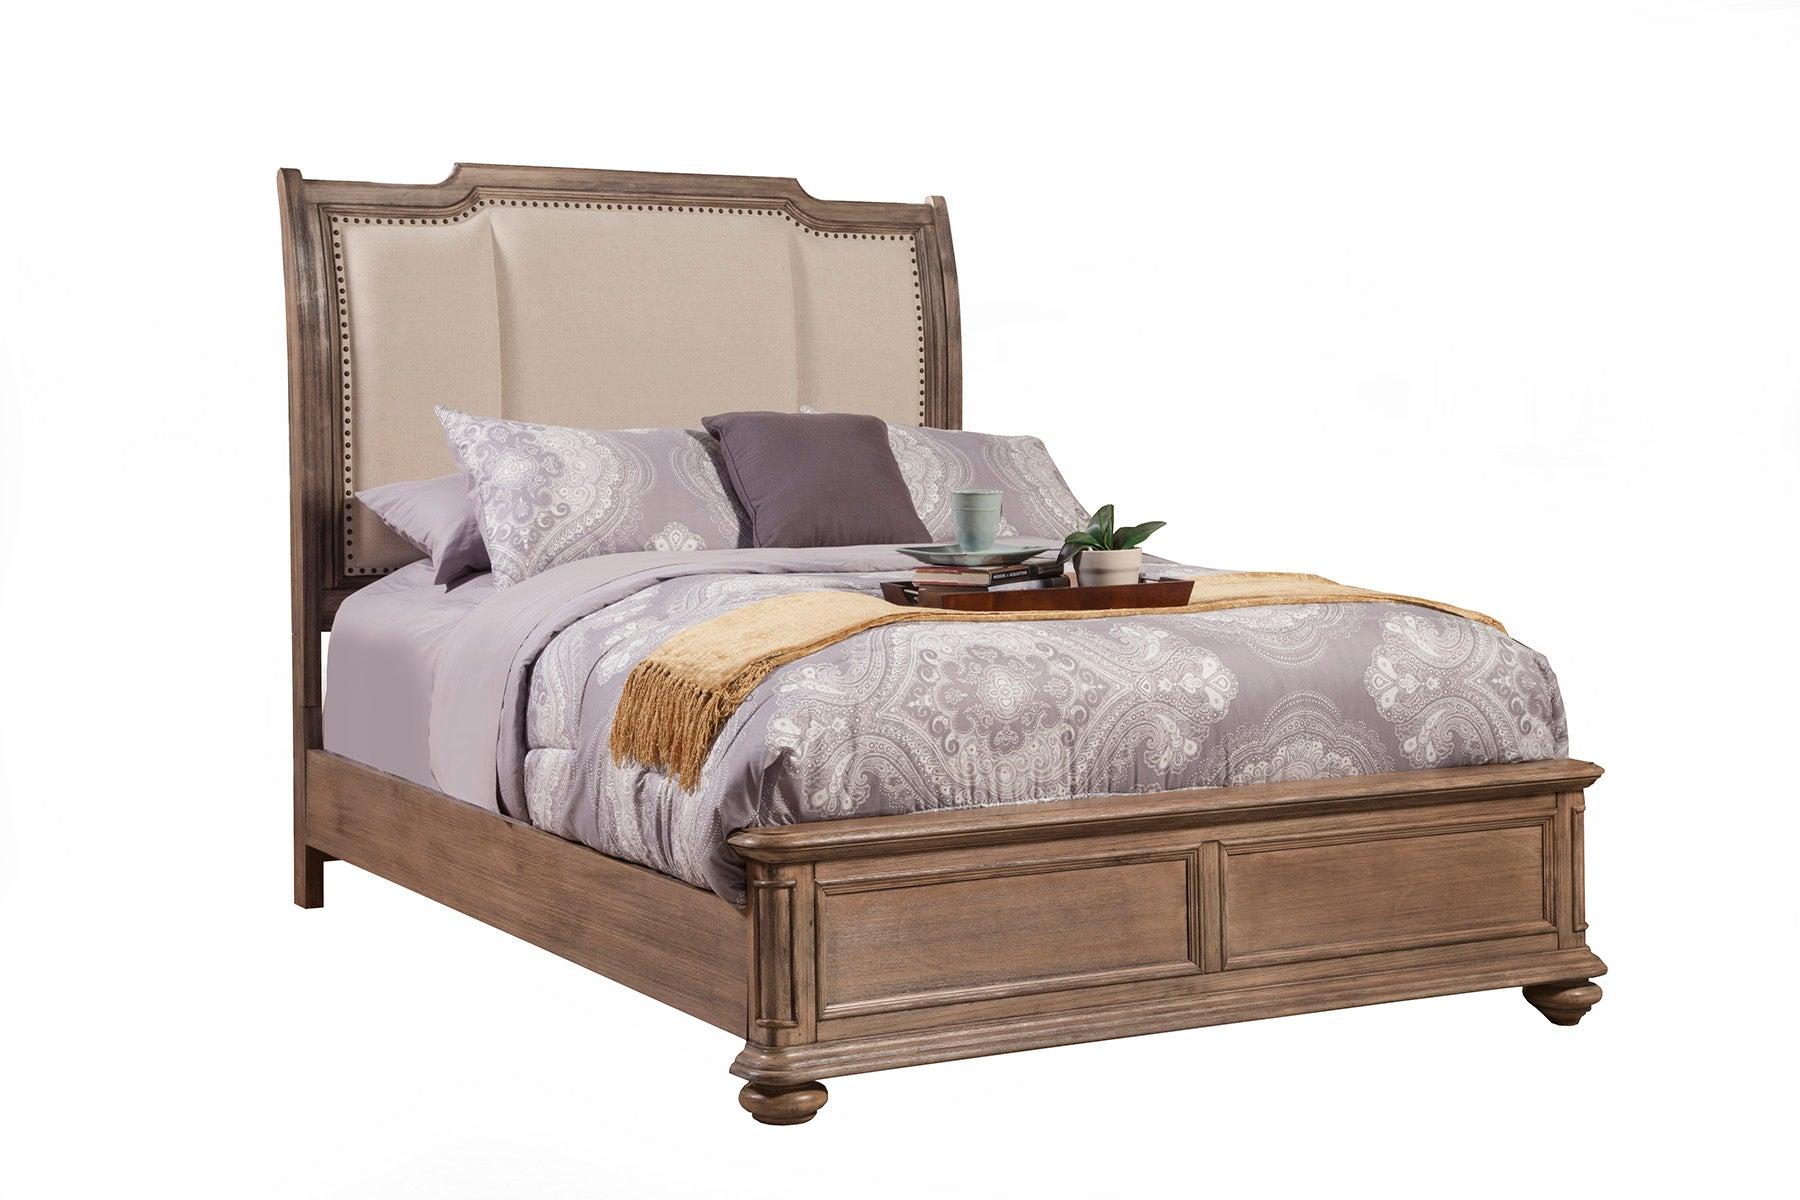 Modern, Traditional Sleigh Bed MELBOURNE 1200-01Q in Truffle Fabric